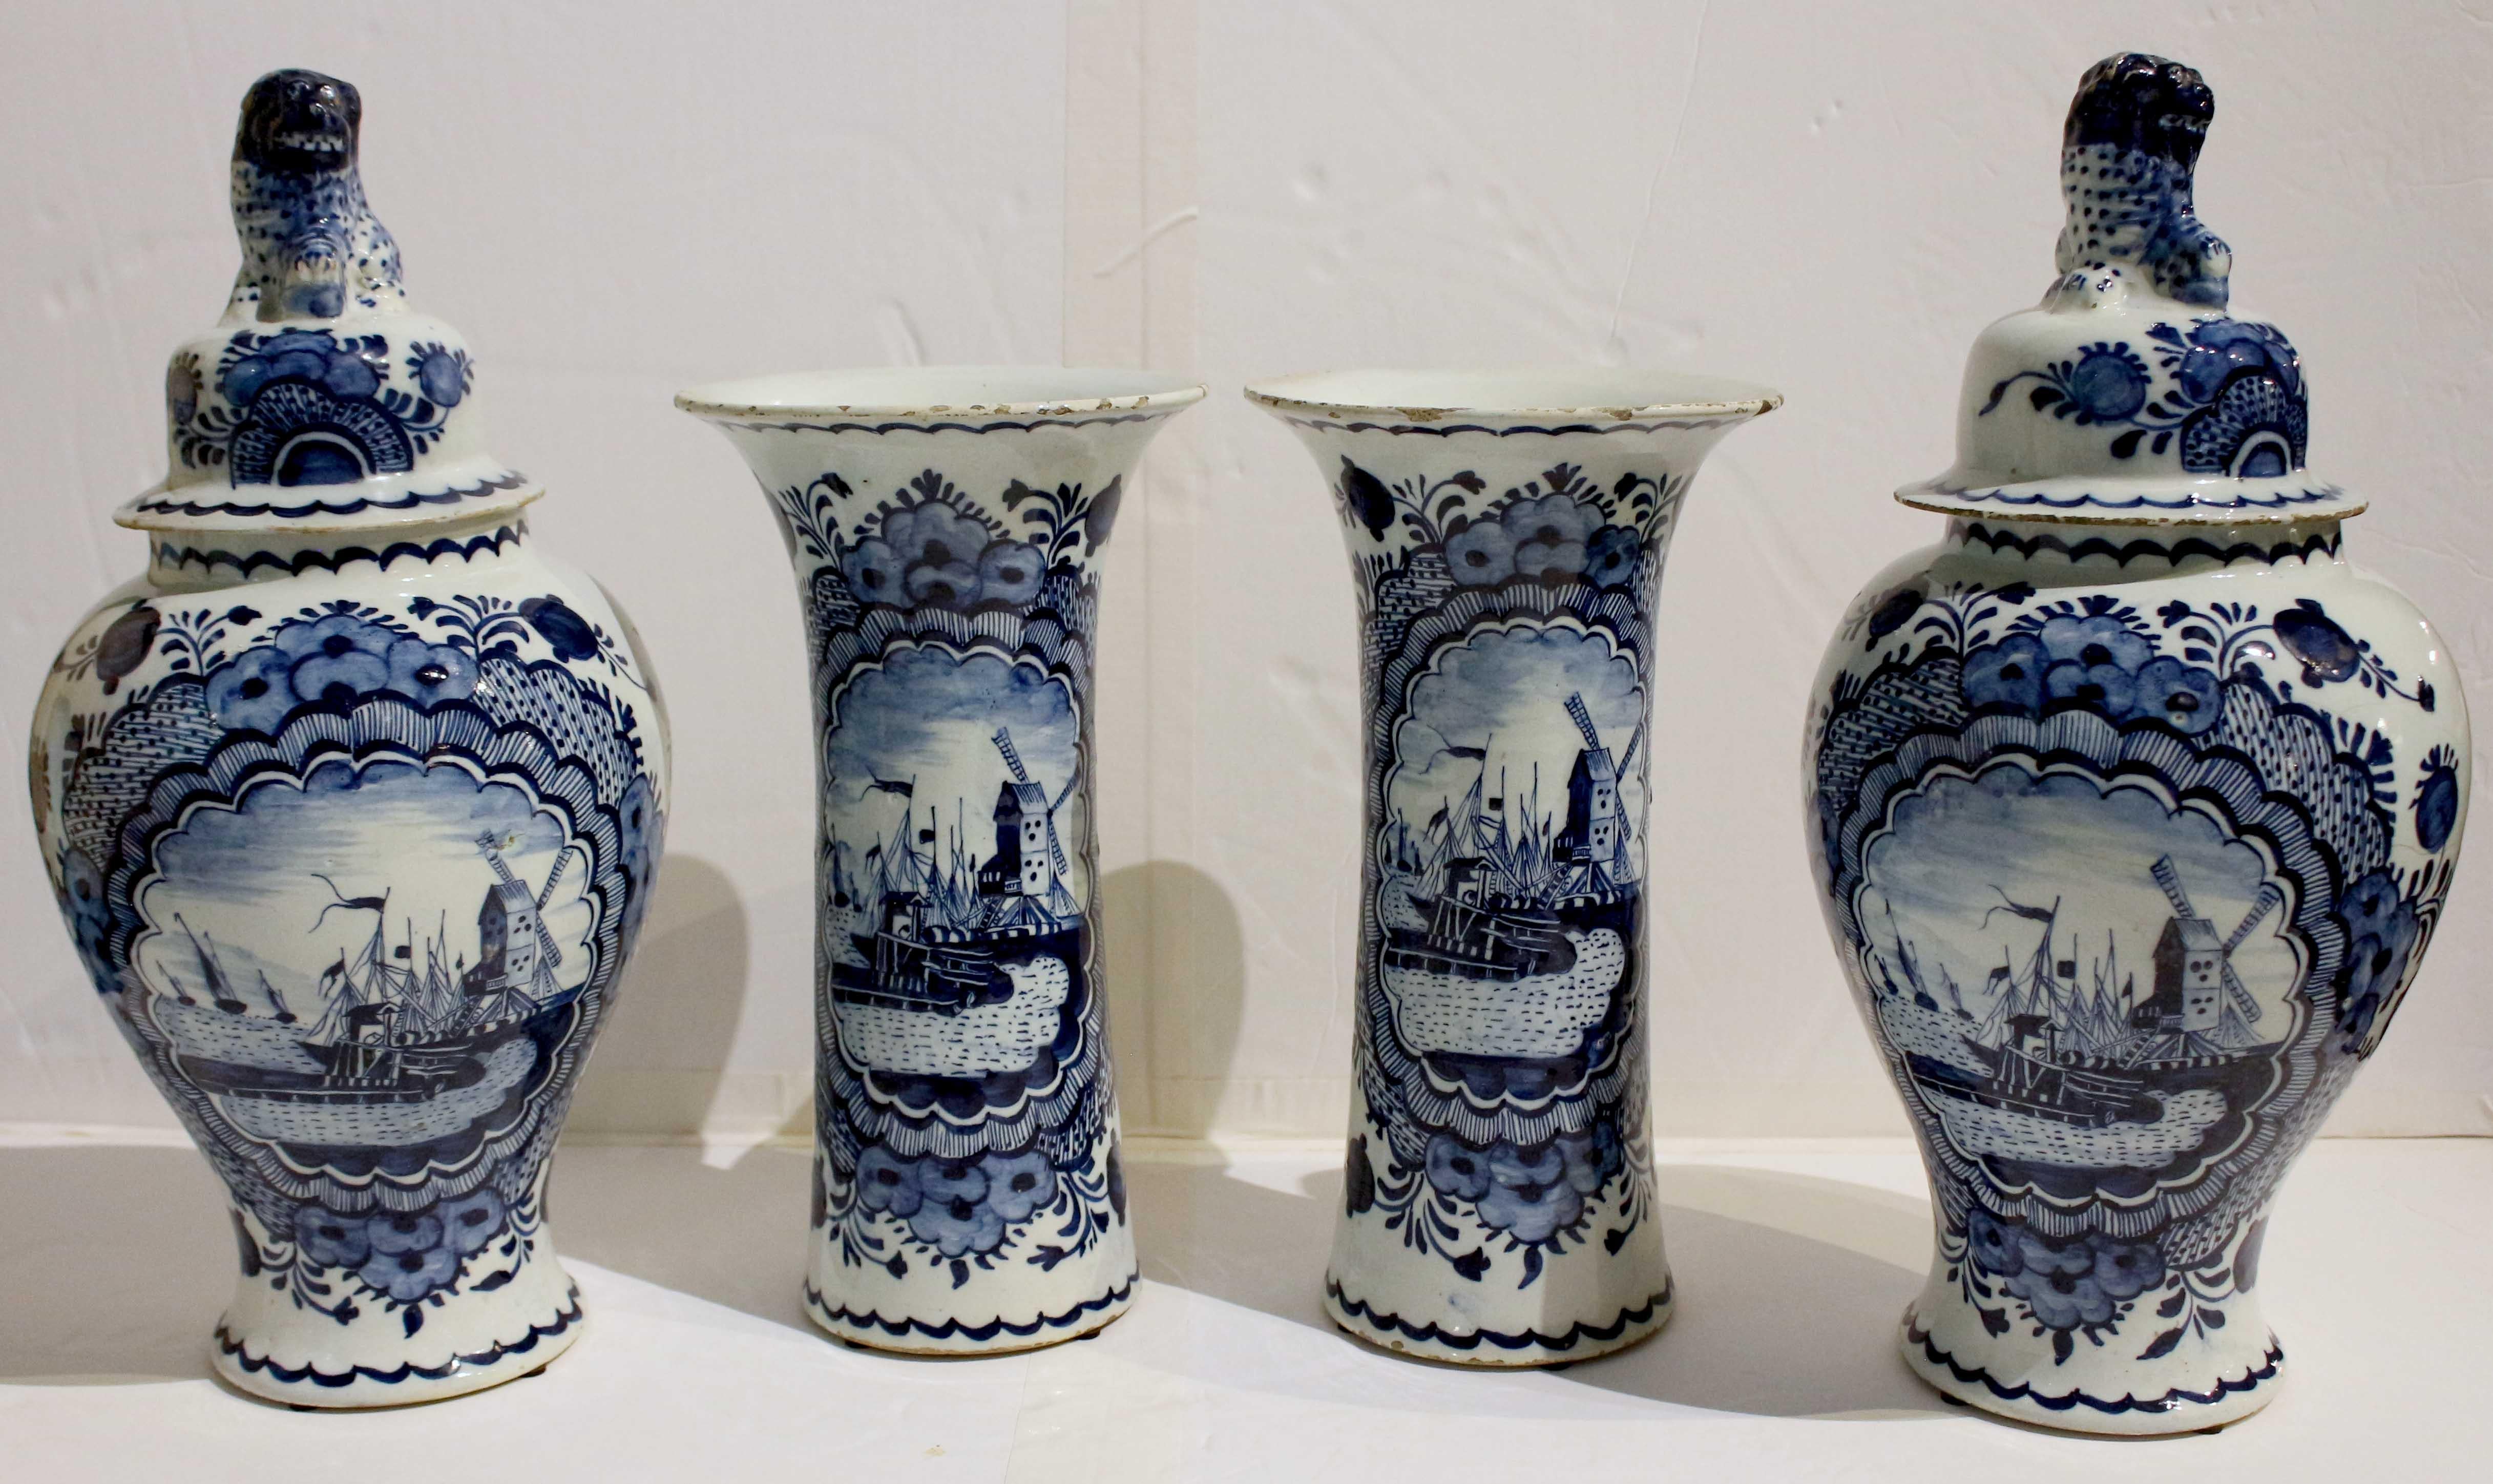 Circa 1800 Delft 4-piece blue & white garniture set. Comprised of 2 covered jars & 2 beaker vases. Each with central medallion scene of a windmill & ships coming to harbor, reversing to floral tendrils. The jars with foo dog finials. Frits typical